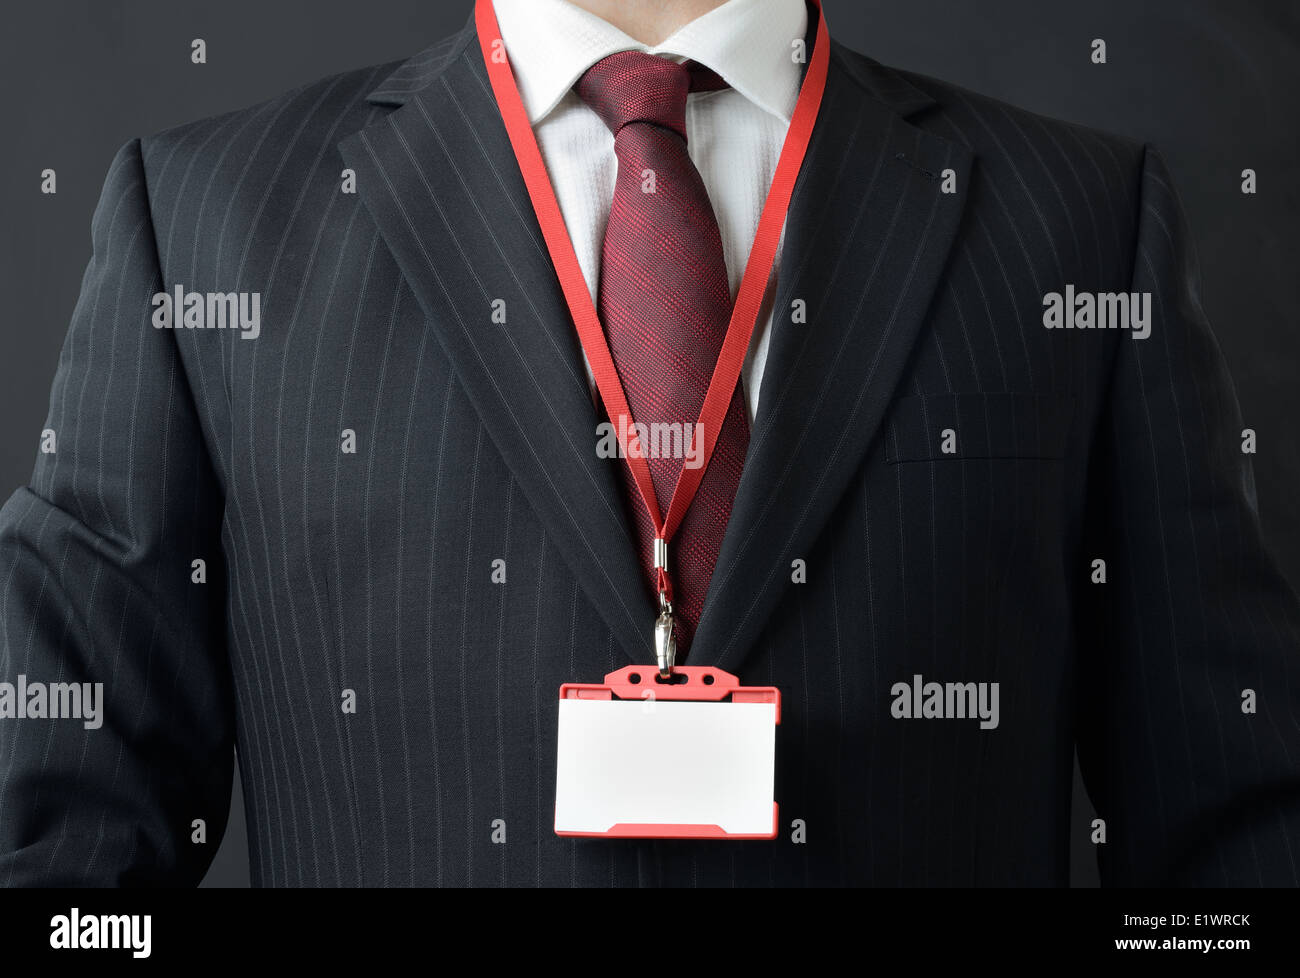 man in suit showing id or name badge Stock Photo